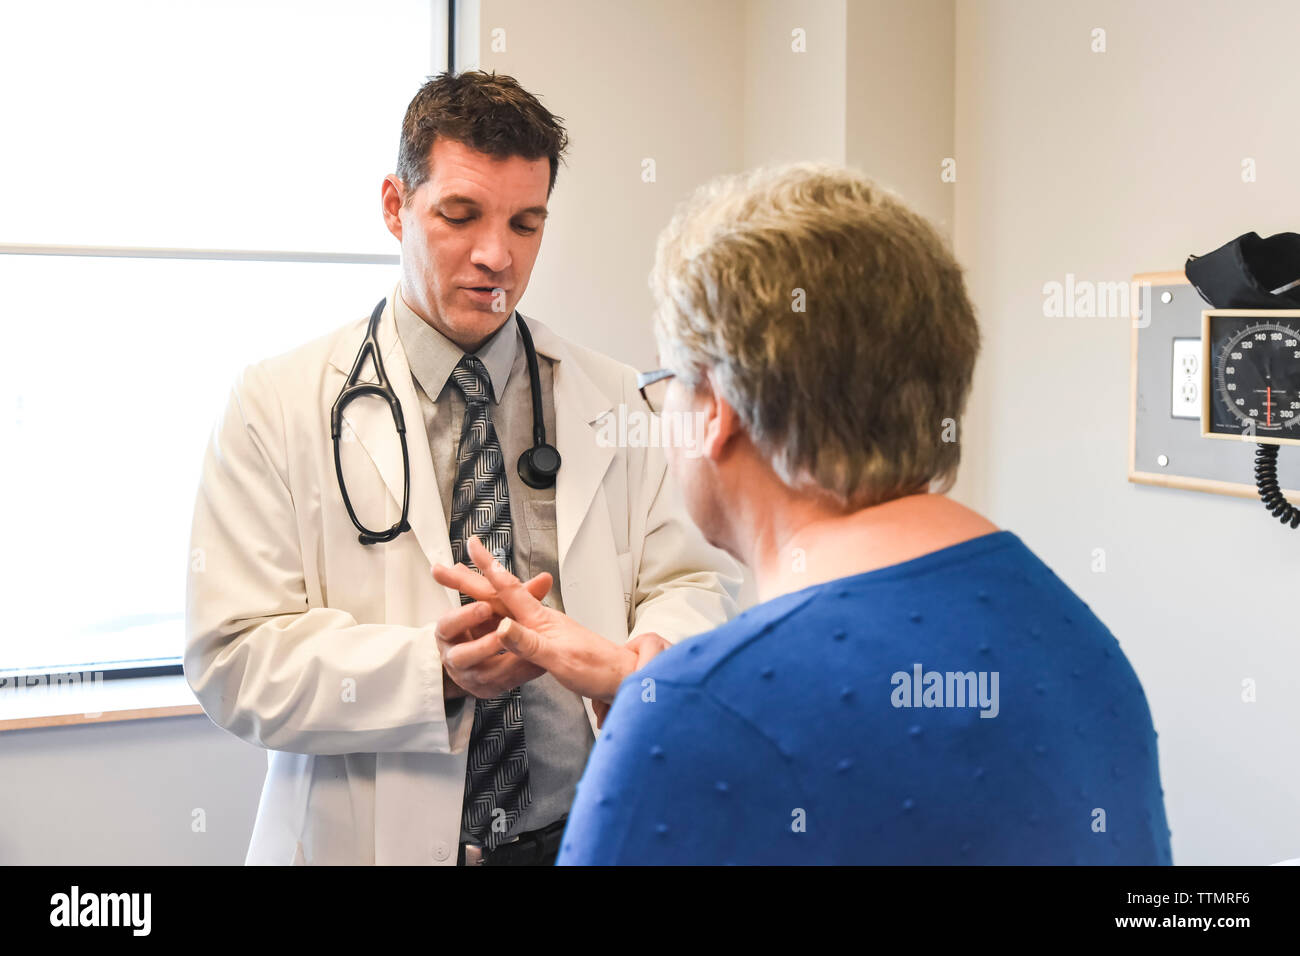 Doctor examining the hand of  an older patient in a clinical setting. Stock Photo